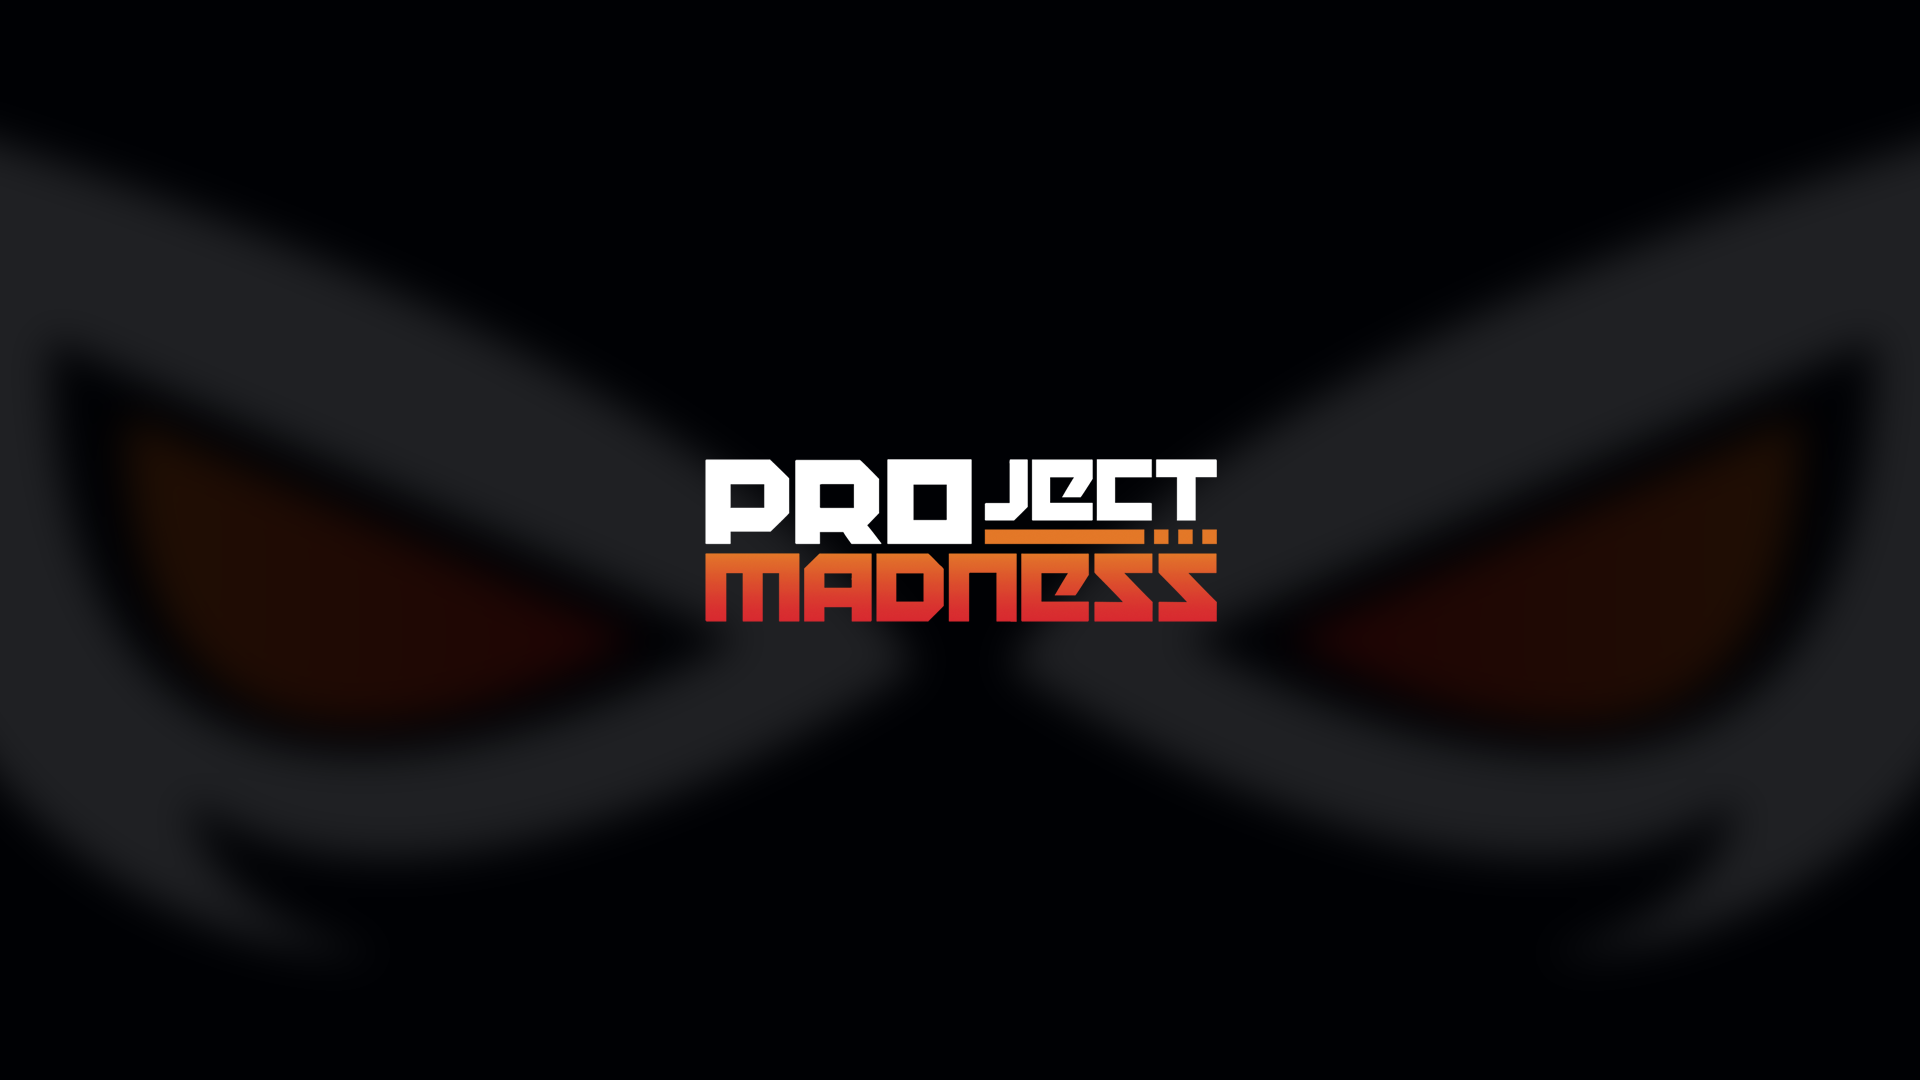 Project Madness